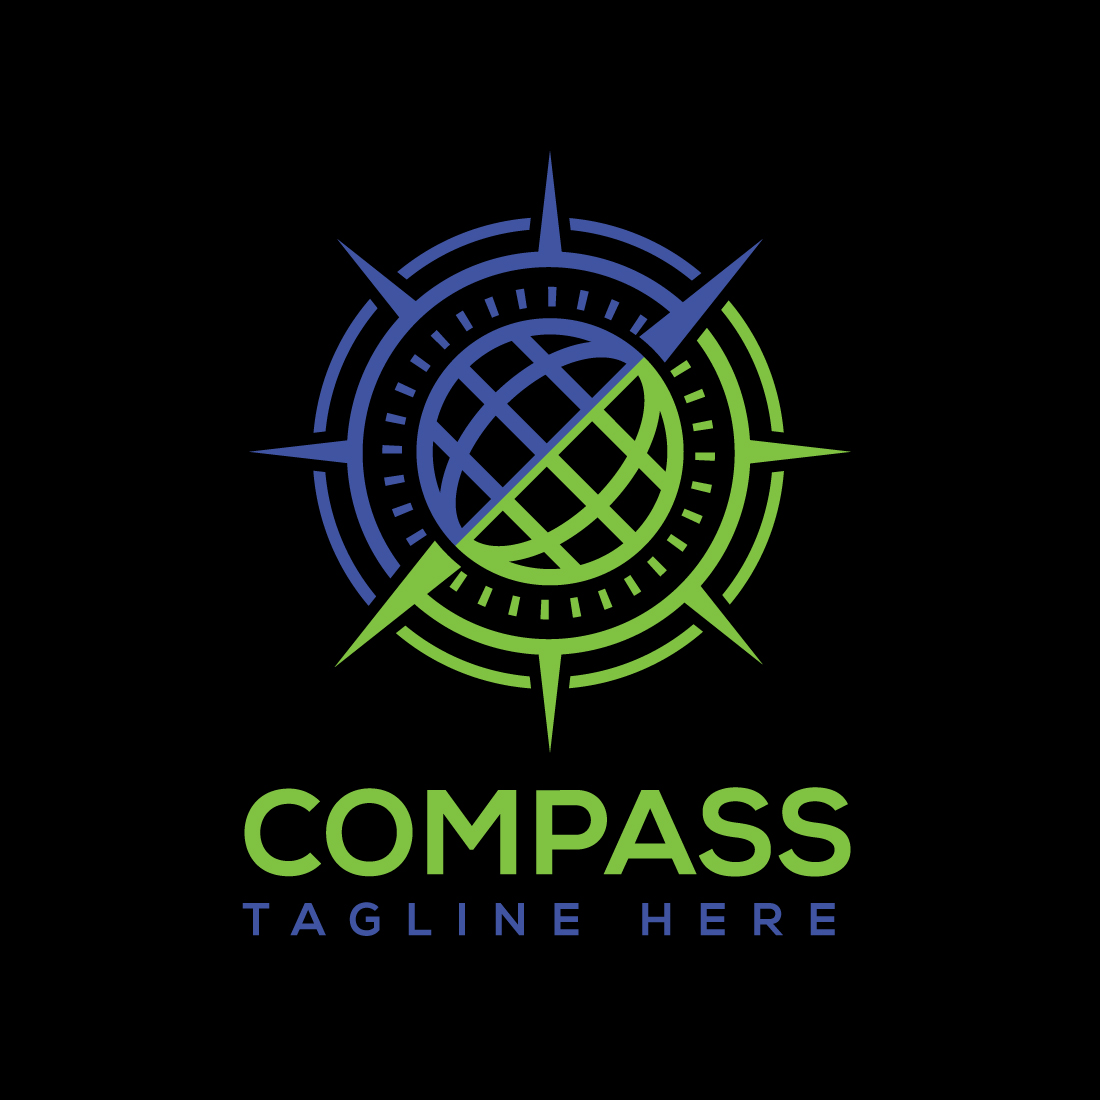 Irresistible image of a round logo in the form of a compass on a black background.